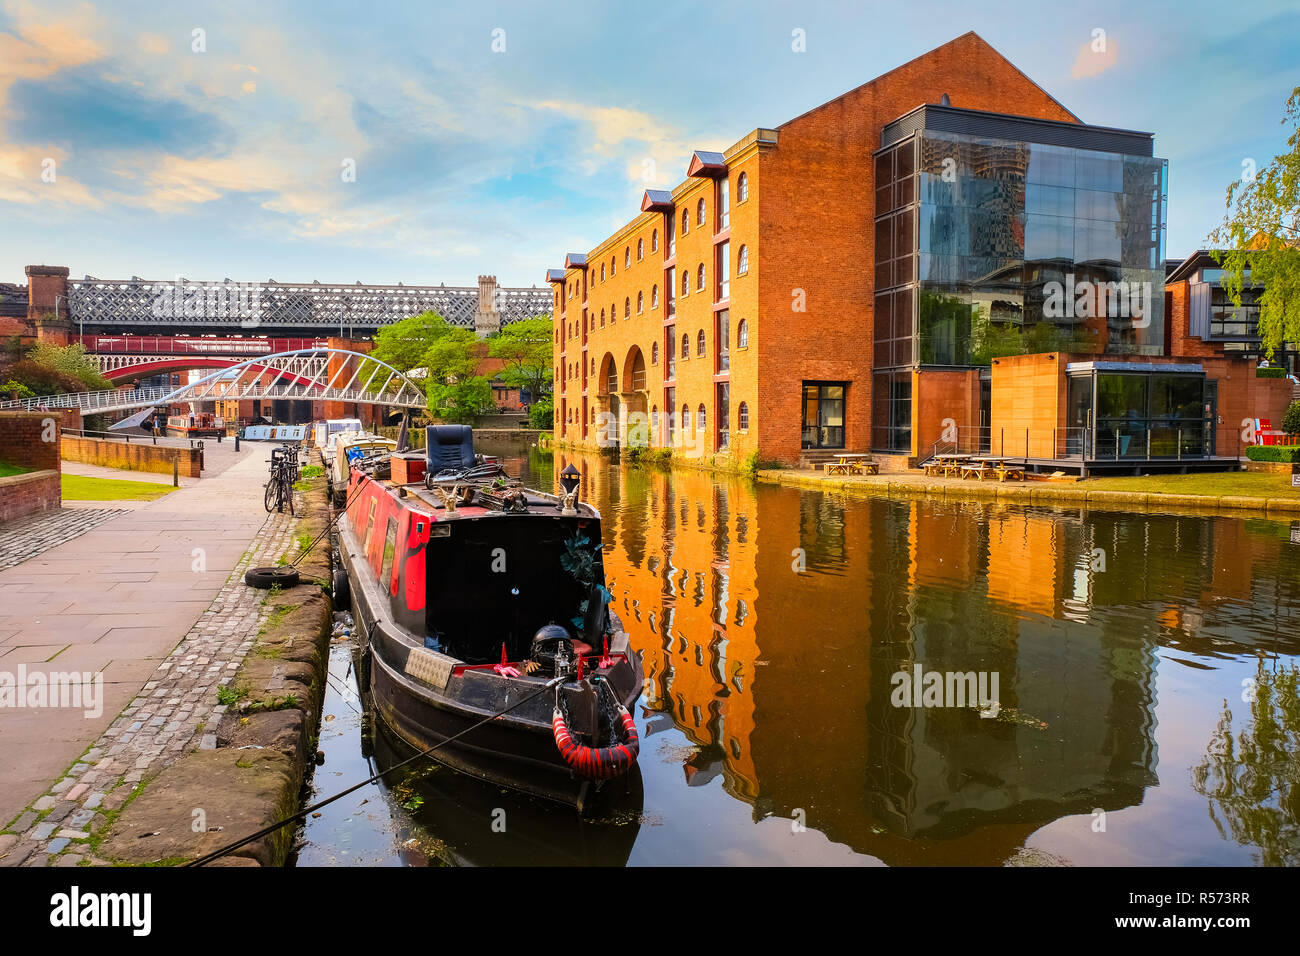 Castlefield, the inner city conservation area which  bounded by the River Irwell, Quay St., Deansgate and the Chester Rd. in Manchester, UK Manchester Stock Photo